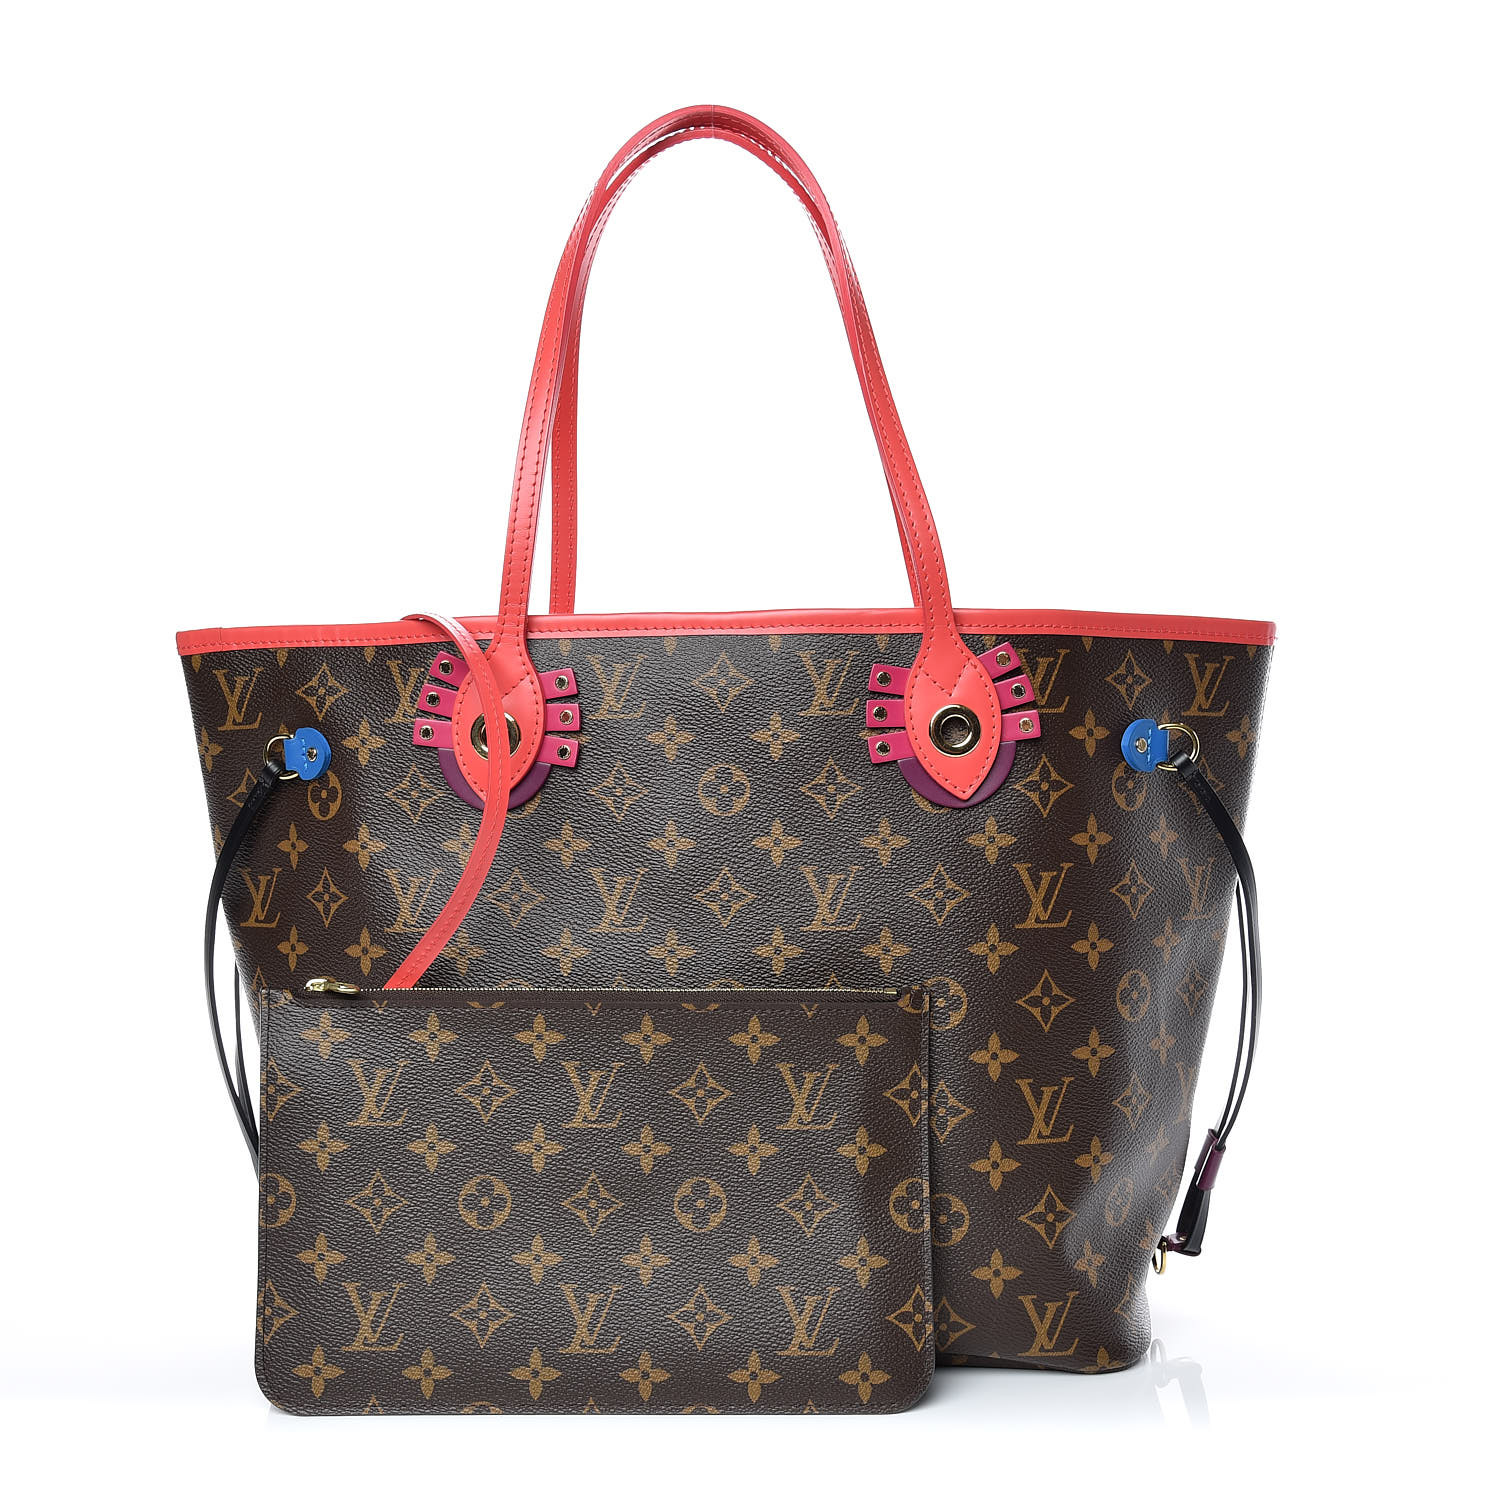 Limited edition Totem / Louis Vuitton Neverfull MM tote bag in